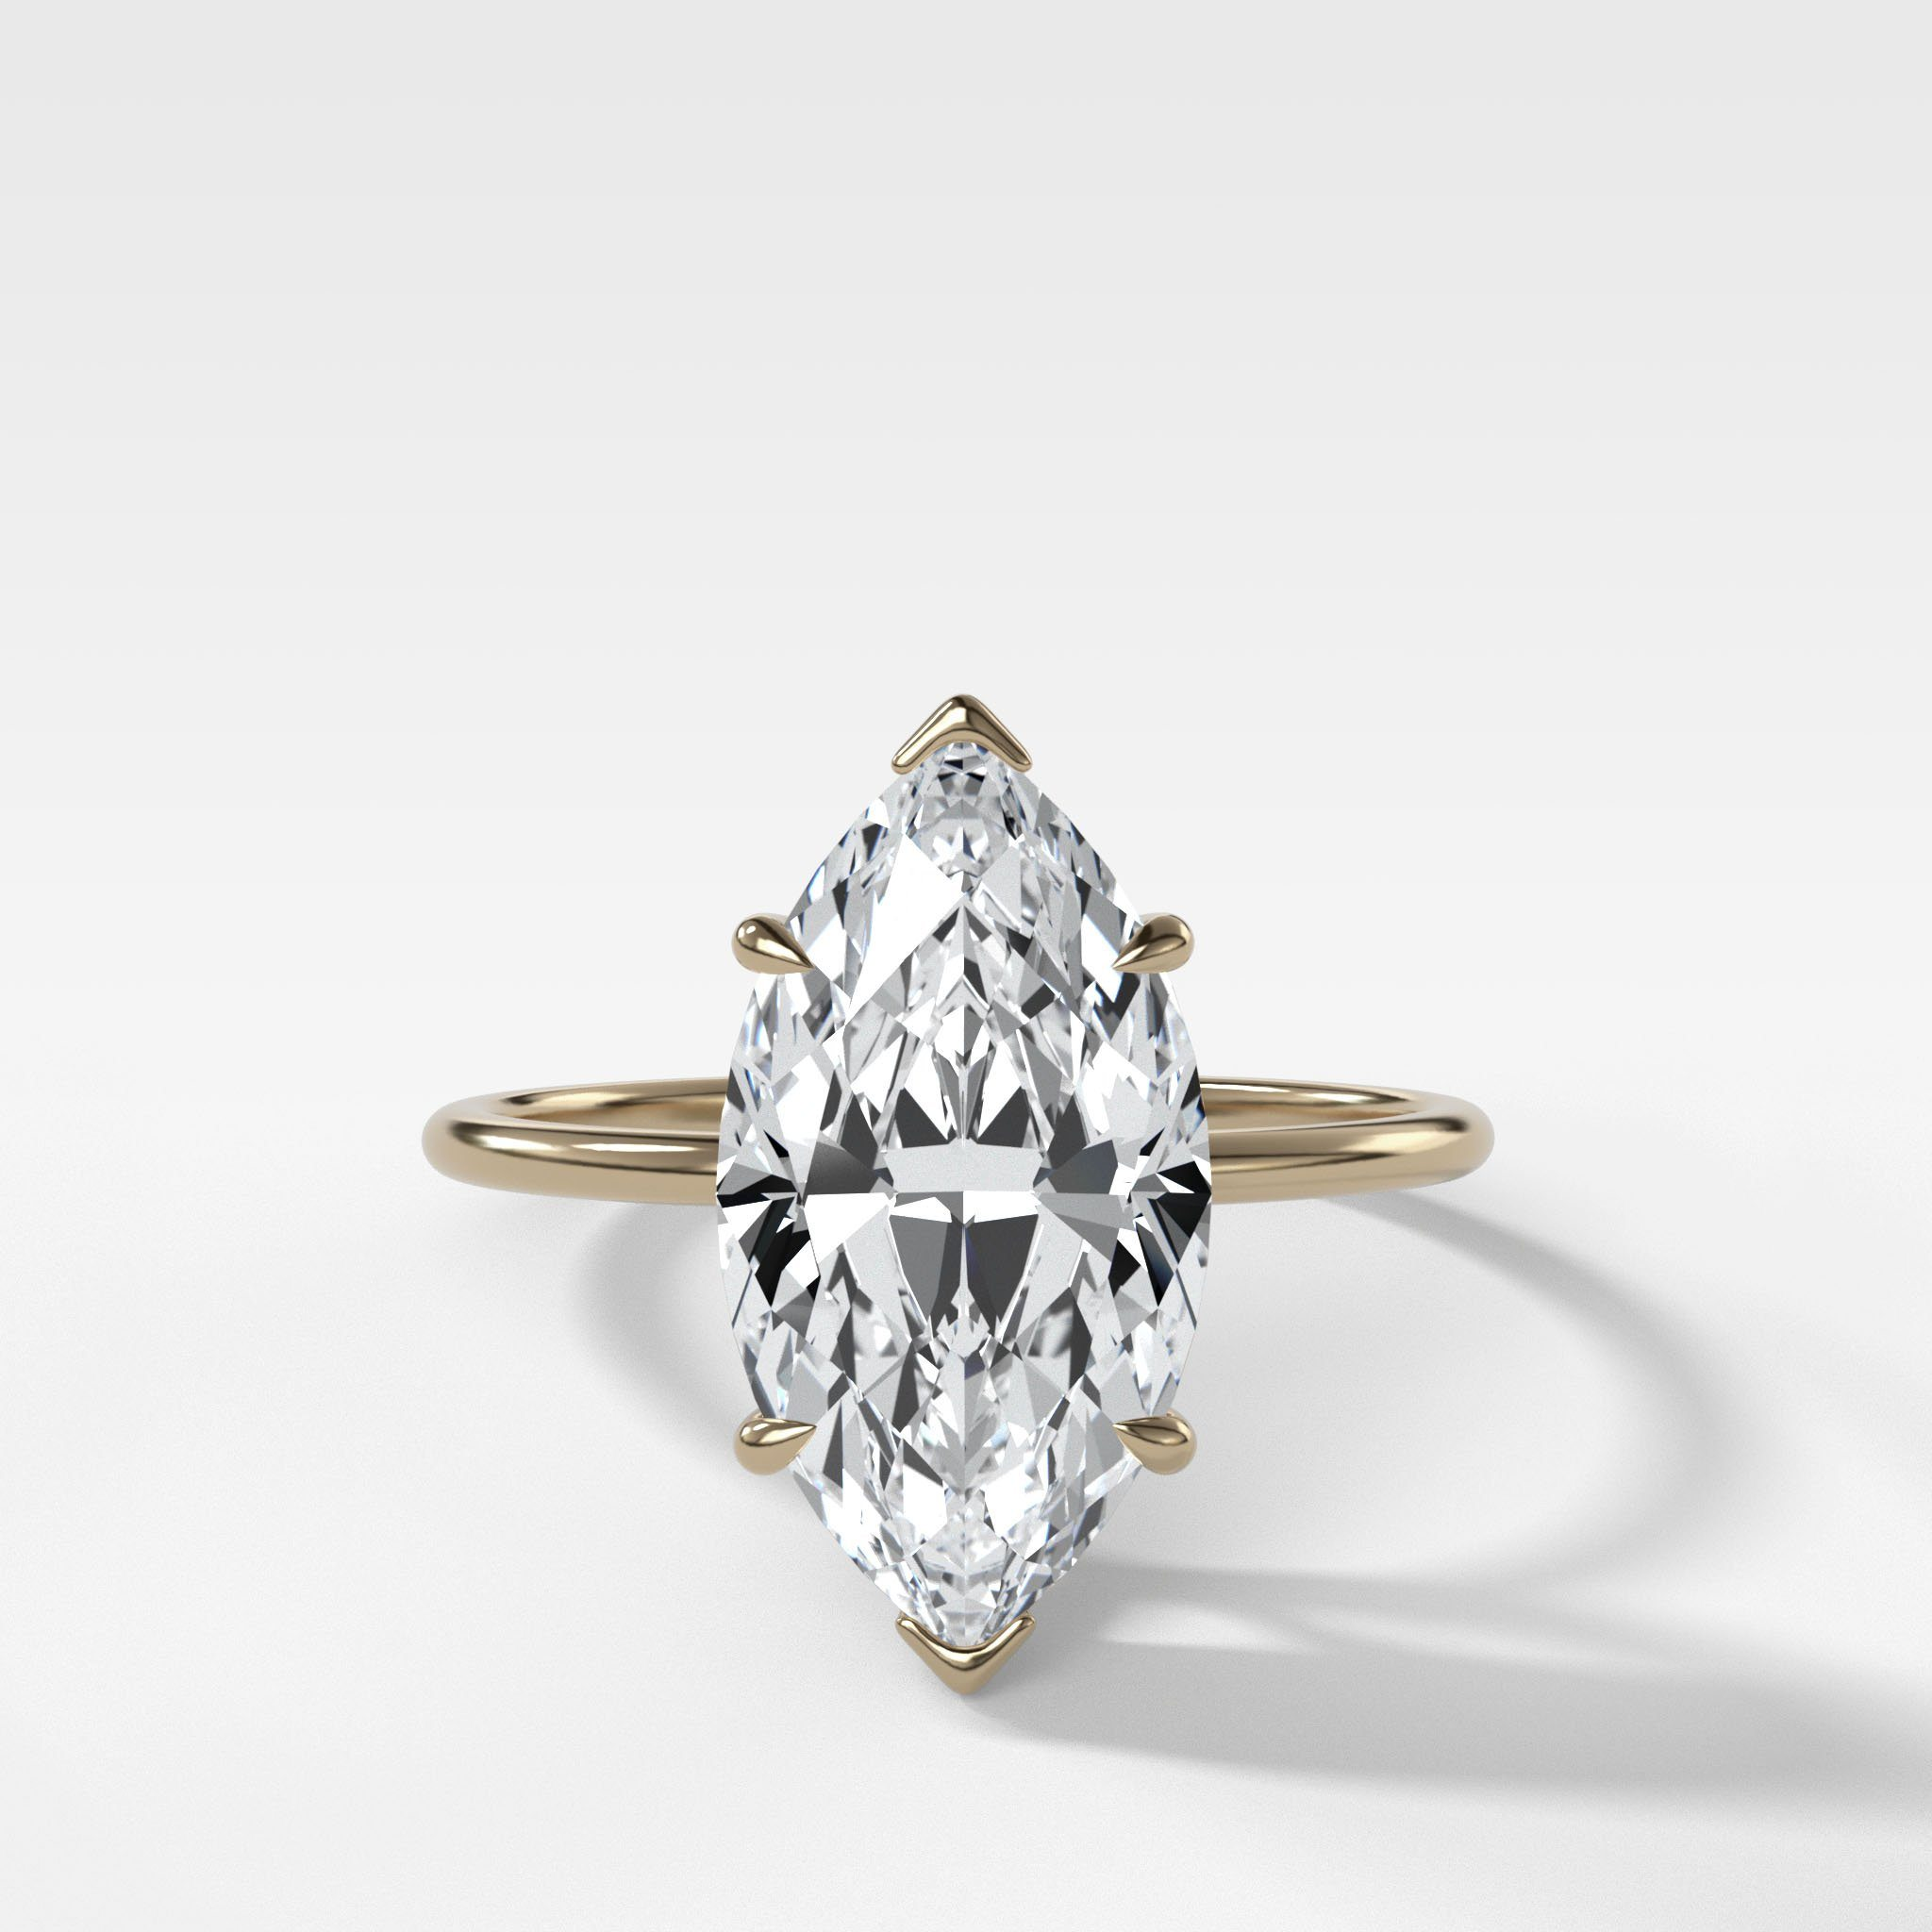 GOODSTONE Thin and simple solitaire marquise engagement ring